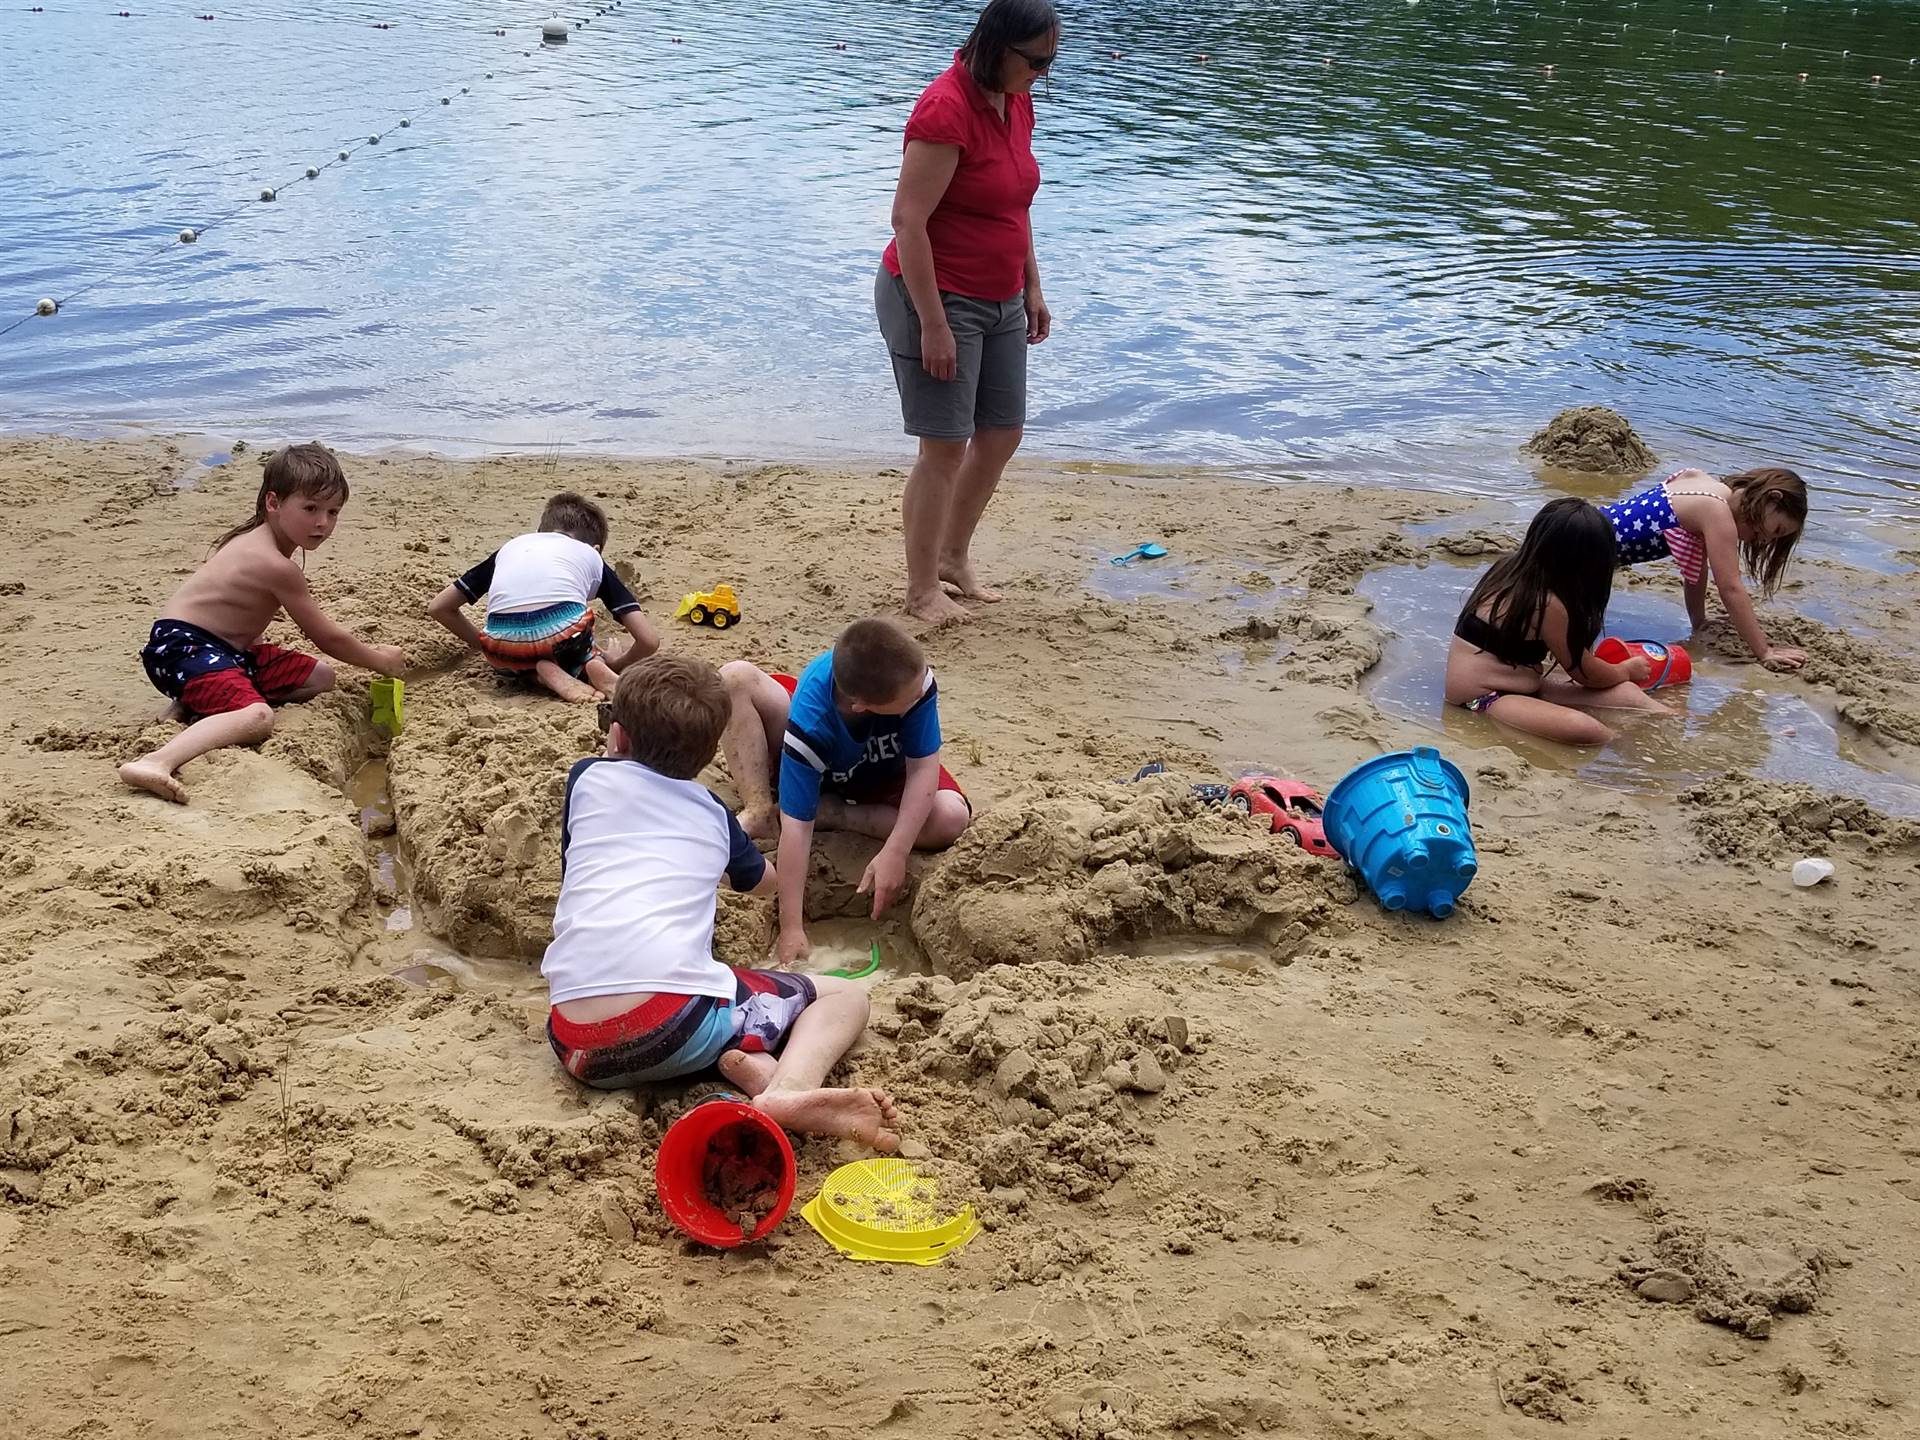 student engineers create sand castles at the beach.